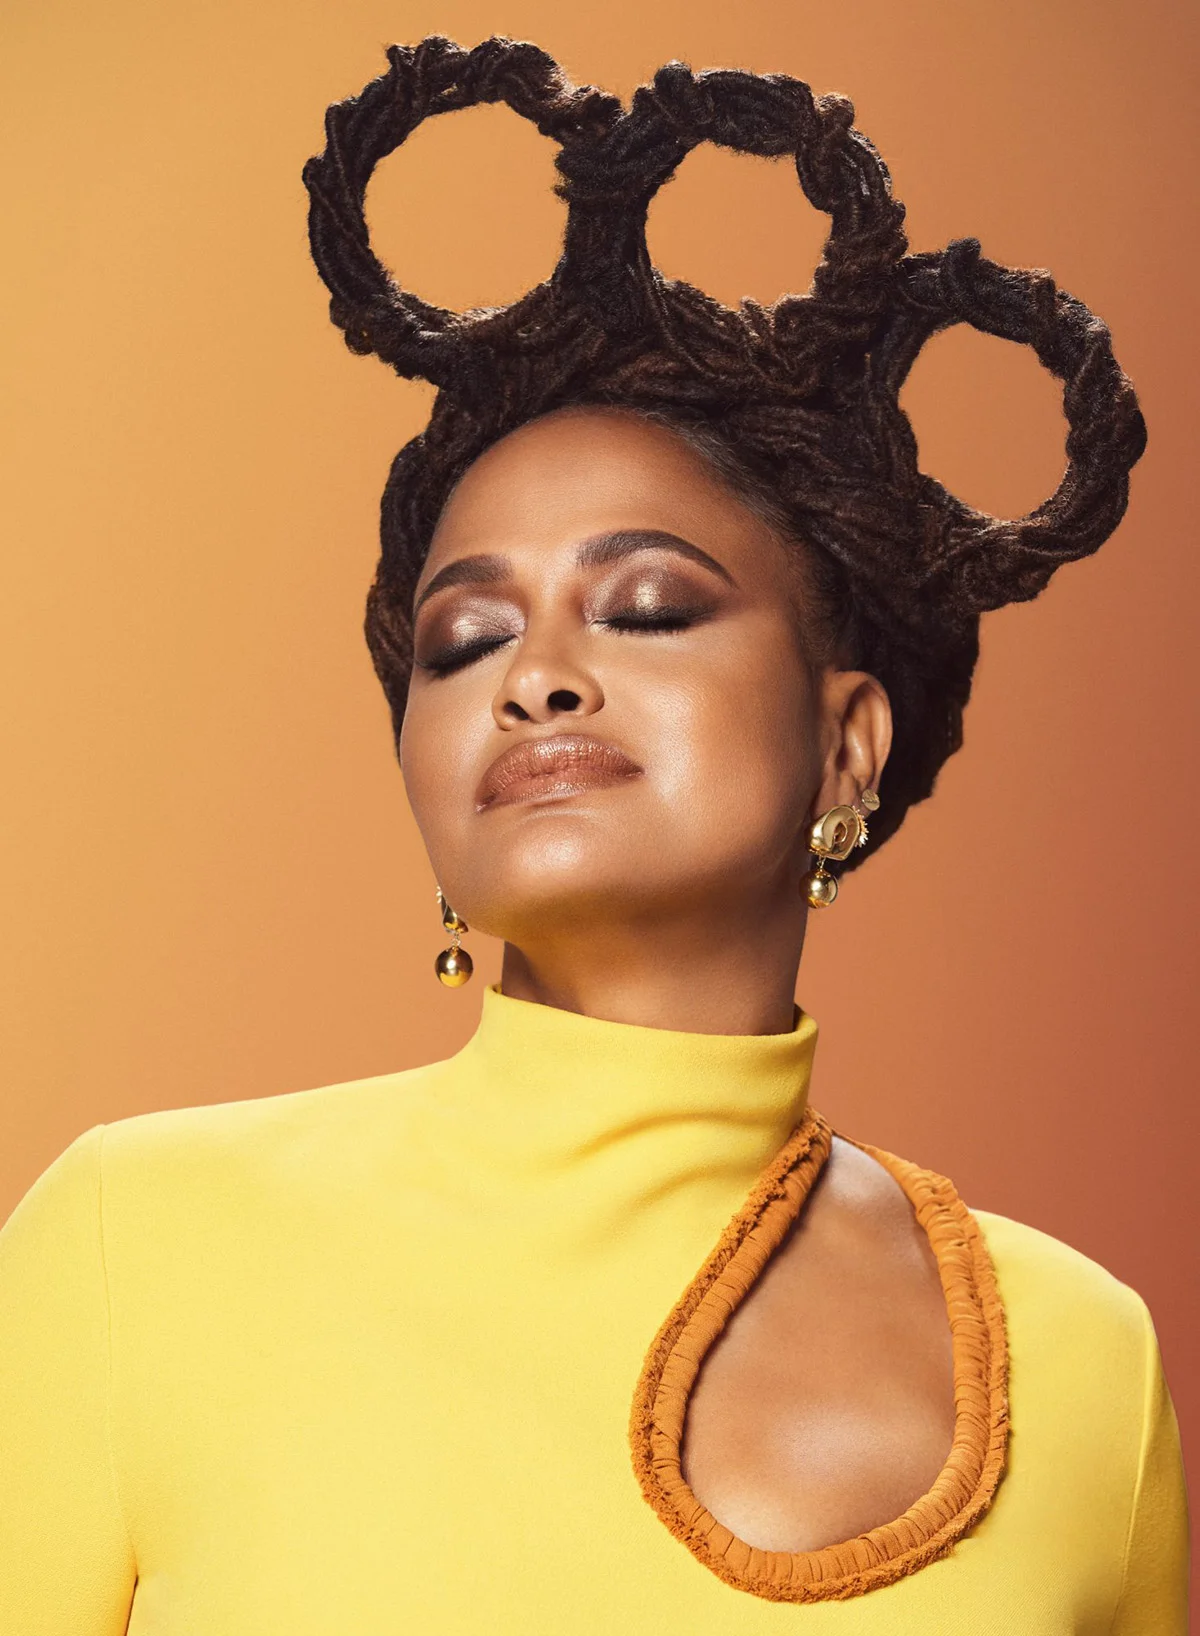 Ava DuVernay covers InStyle US March 2022 Digital Edition by Chrisean Rose